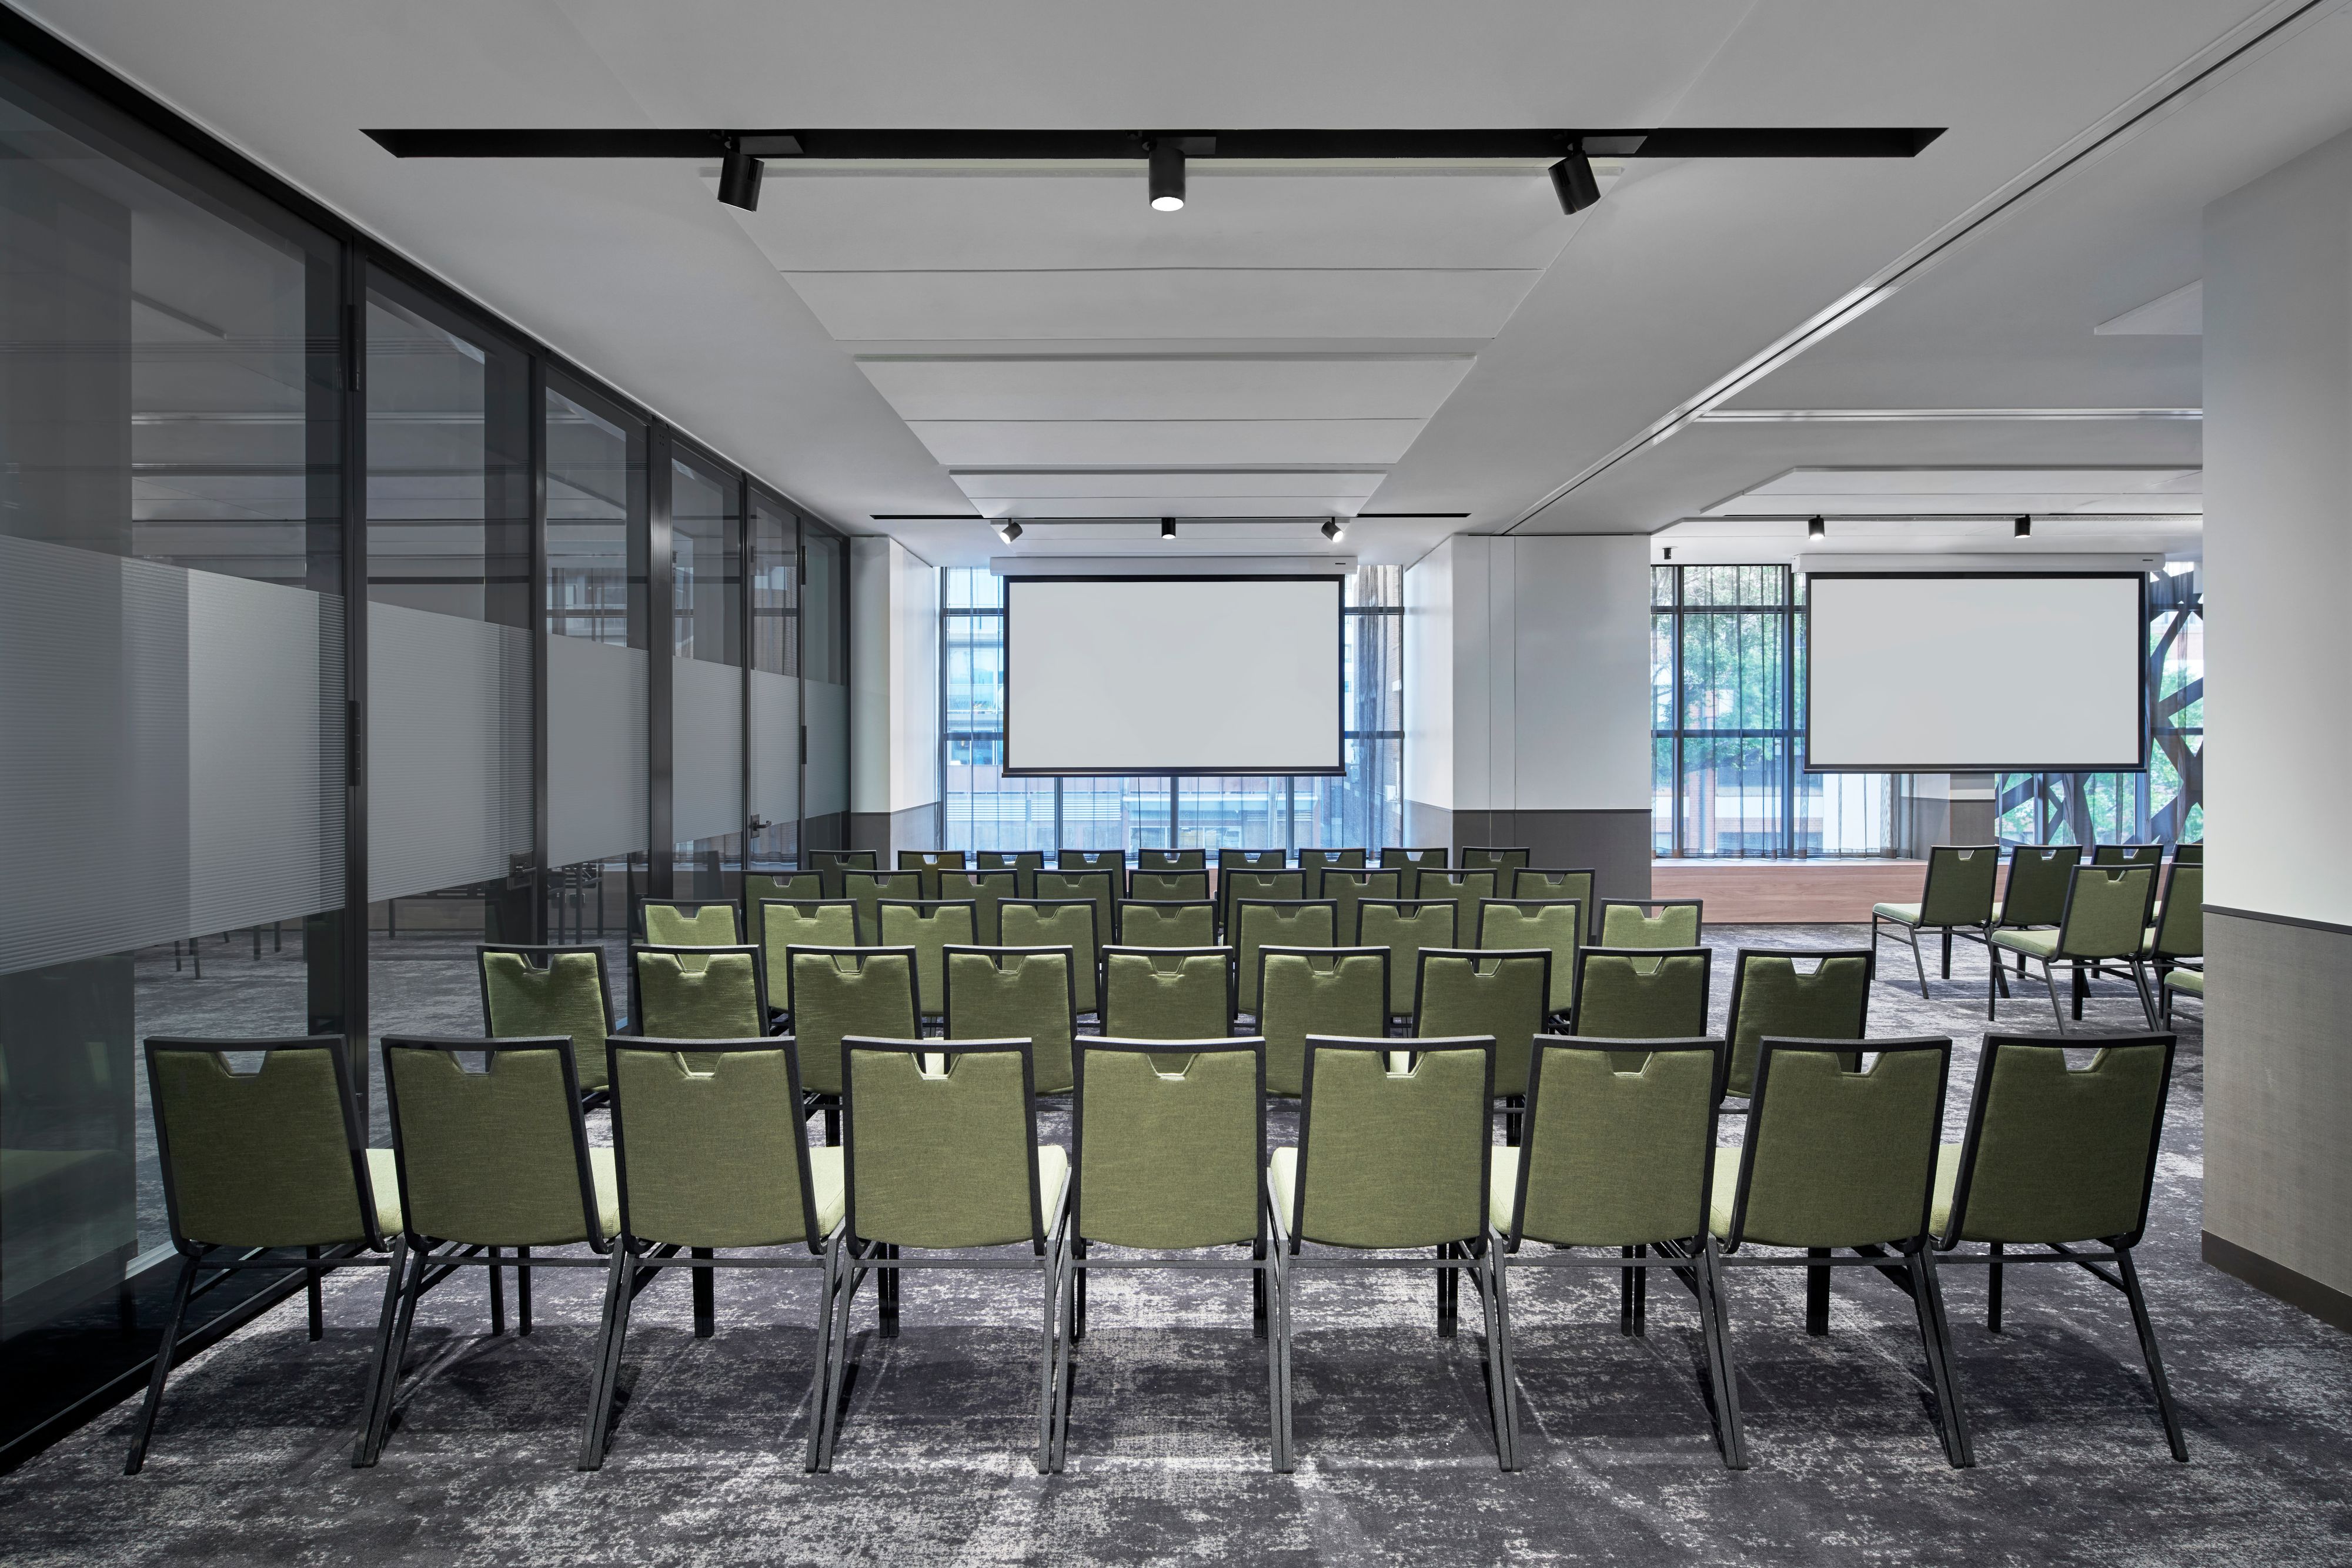 Meeting room setup with rows of chairs and projector screens